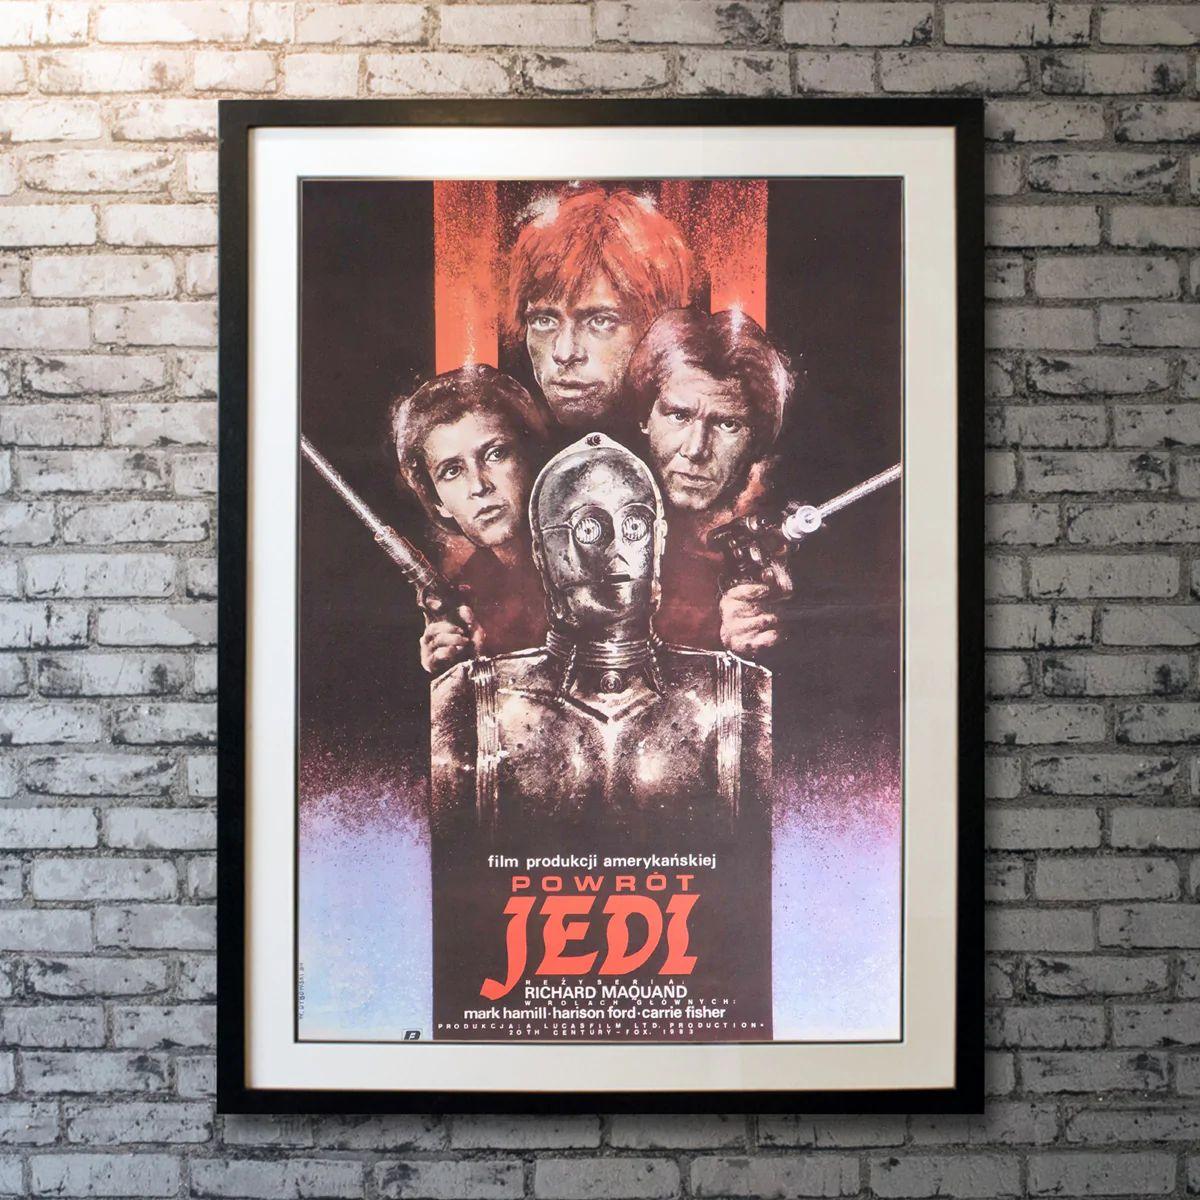 Star Wars: Return of The Jedi, unframed poster, 1984.

Original Polish one sheet (27 X 39 Inches). After a daring mission to rescue Han Solo from Jabba the Hutt, the Rebels dispatch to Endor to destroy the second Death Star. Meanwhile, Luke